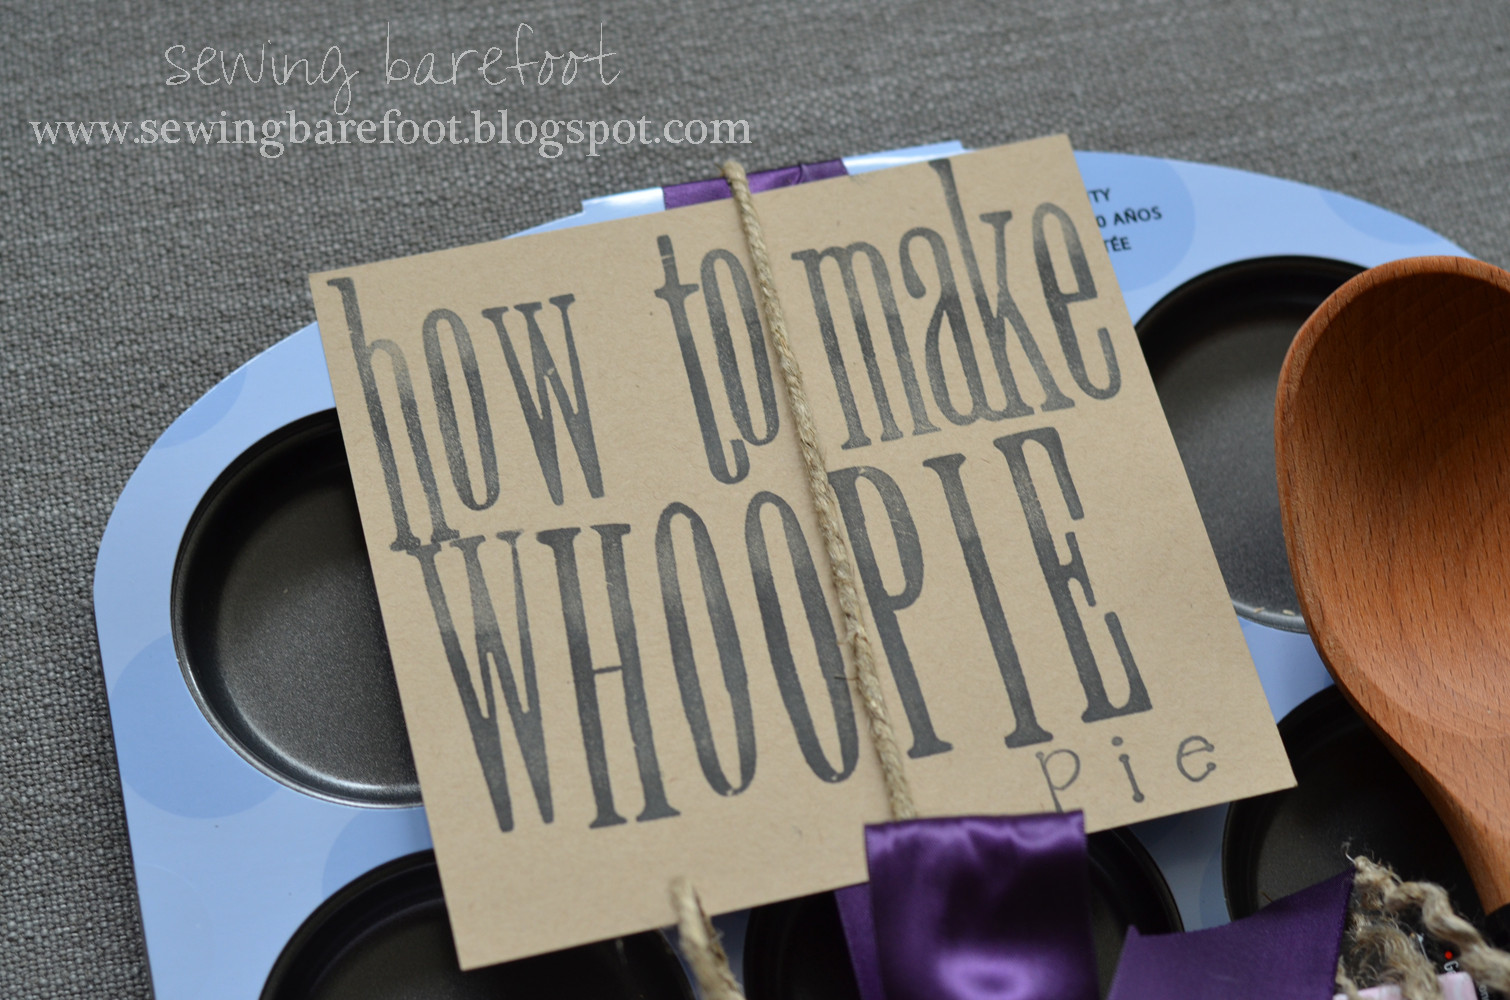 Wedding Gift Ideas For Coworker
 Sewing Barefoot "how to make whoopie" an adorable bridal